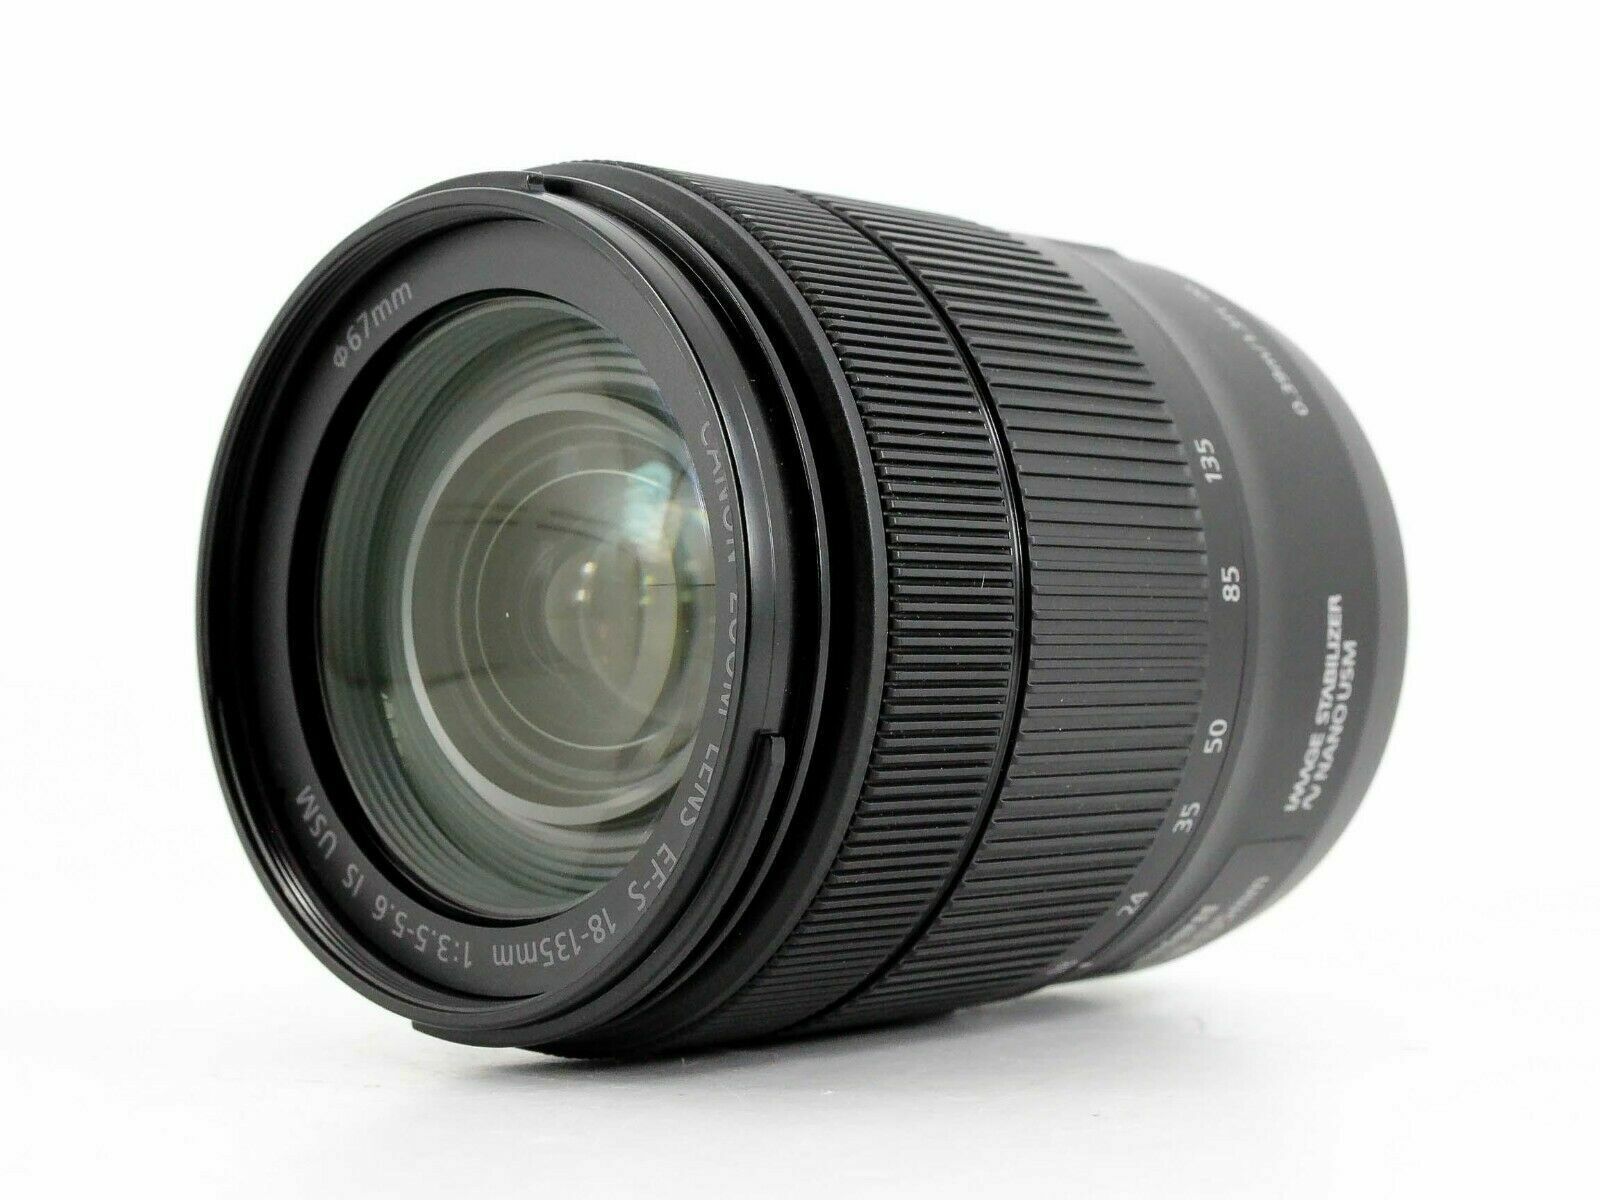 Canon 18-135MM EF-S f3.5-5.6 IS USM Lens - Product Photo 5